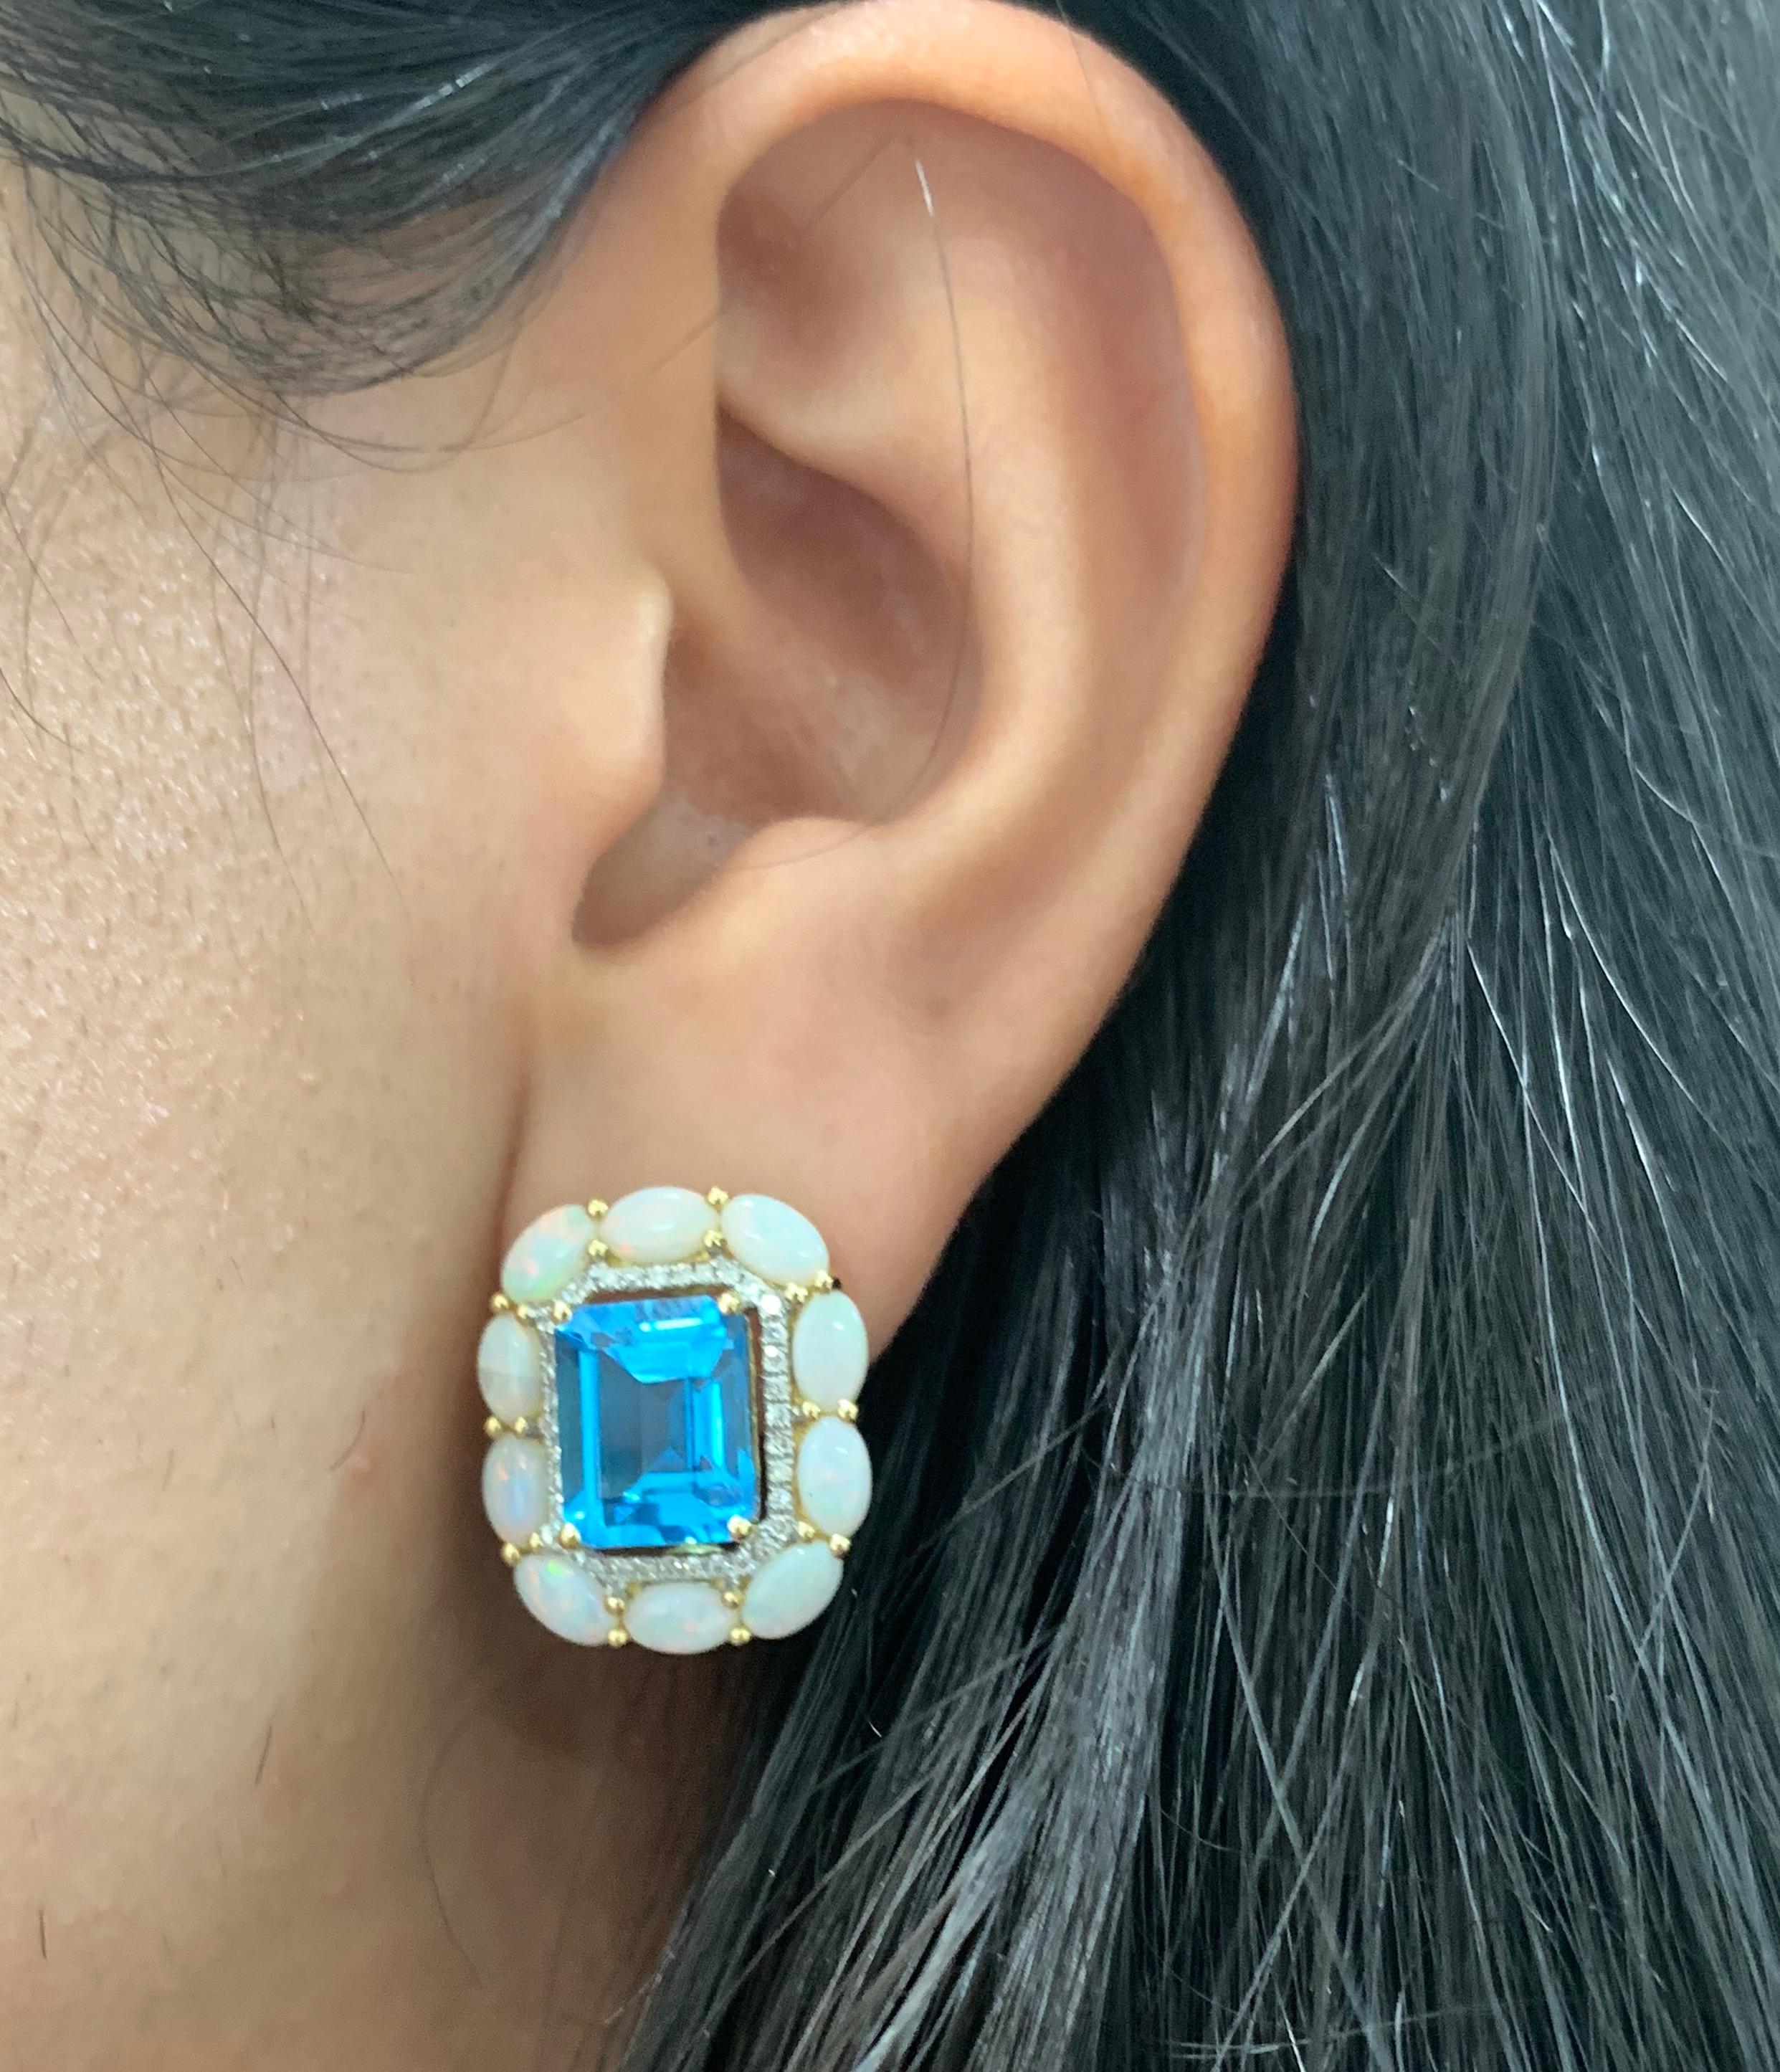 Material: 18K Yellow Gold 
Stone Details: 2 Emerald Cut Blue Topaz at 8.99 Carats Total
Surrounding Stone Details: 20 Oval Opals at 2.87 Carats
Diamond Details: 72 Brilliant Round White Diamonds at 0.28 Carats - Clarity: SI / Color

Fine